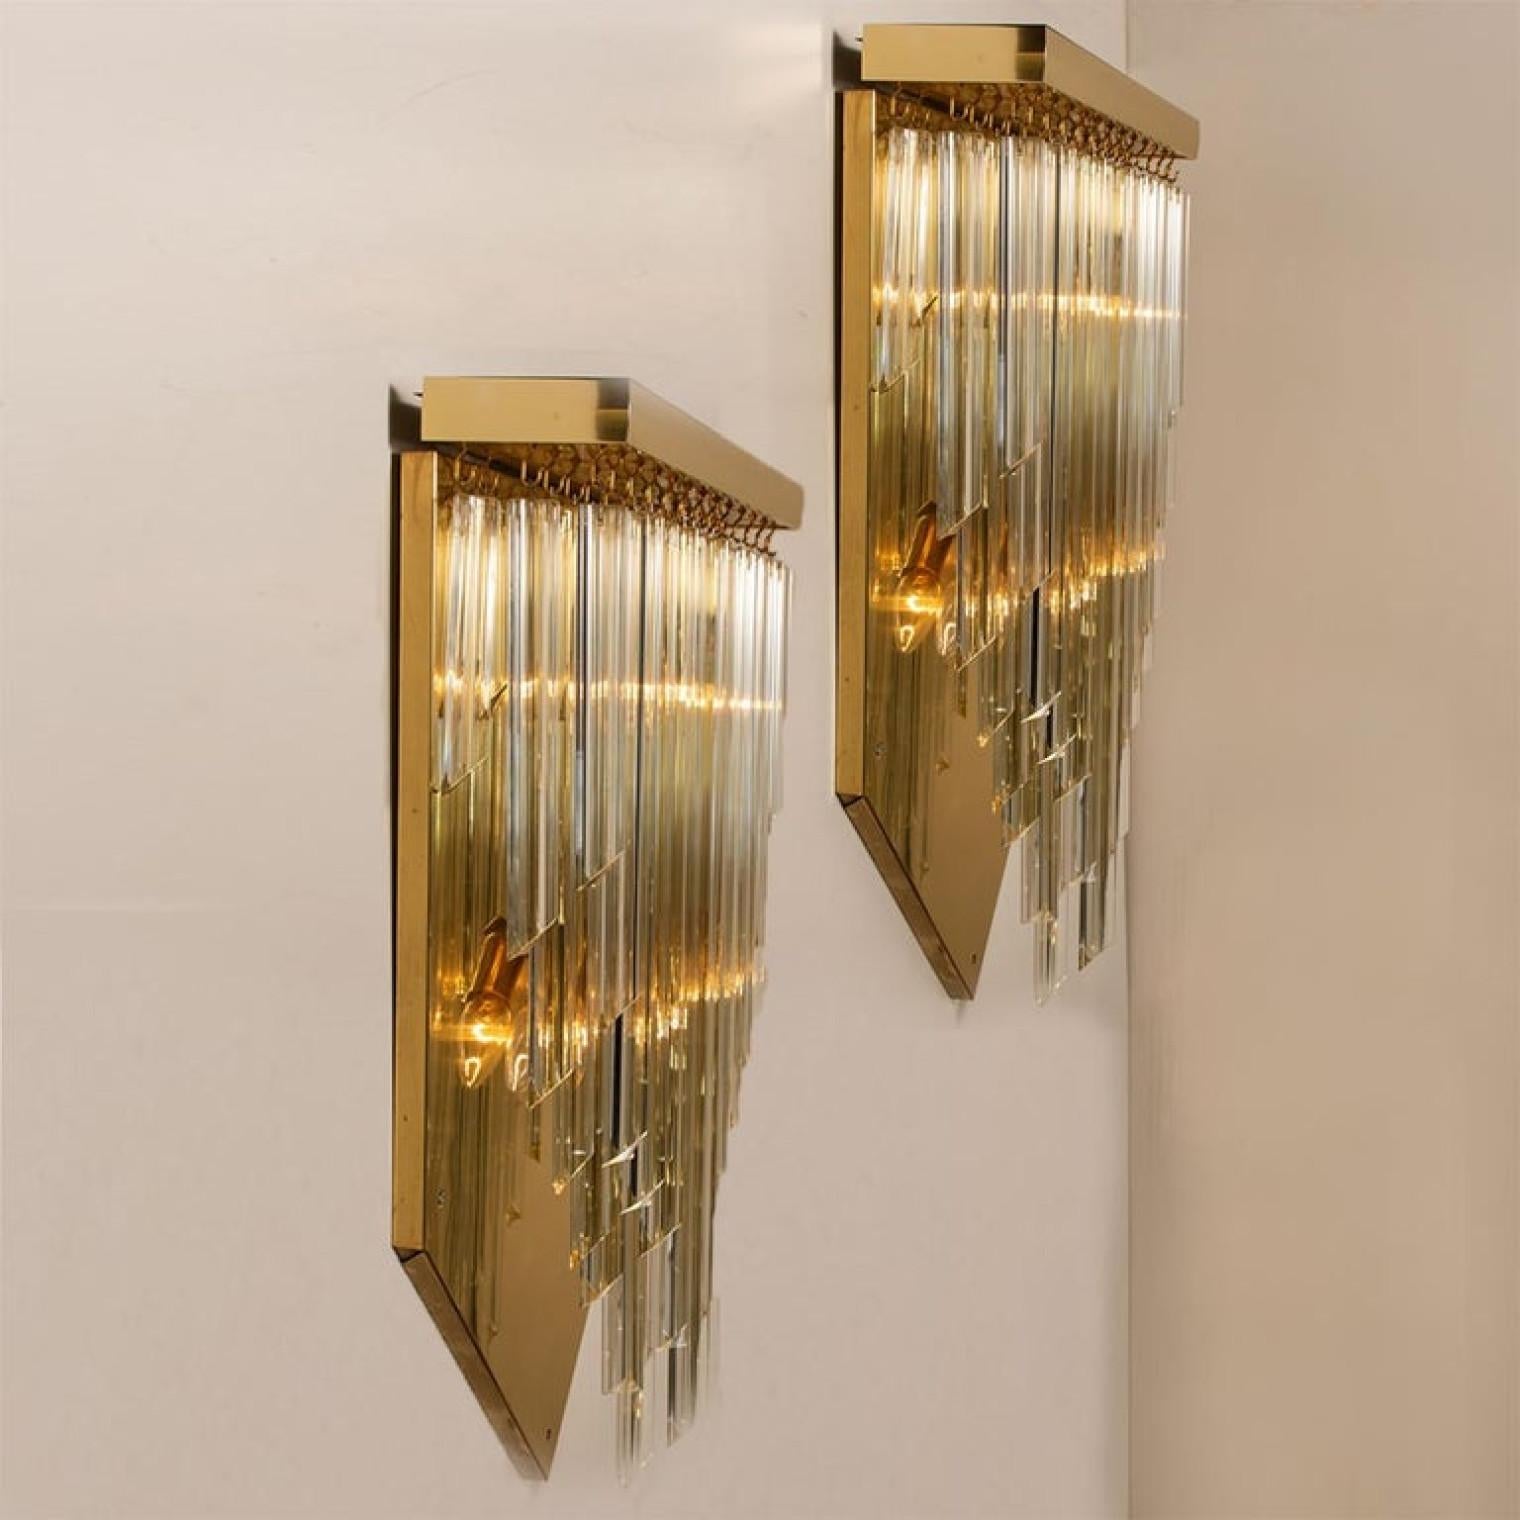 1 of the 6 XXL 'H29.9' Venini Style Murano Glass and Gilt Brass Sconces, 1960s For Sale 1